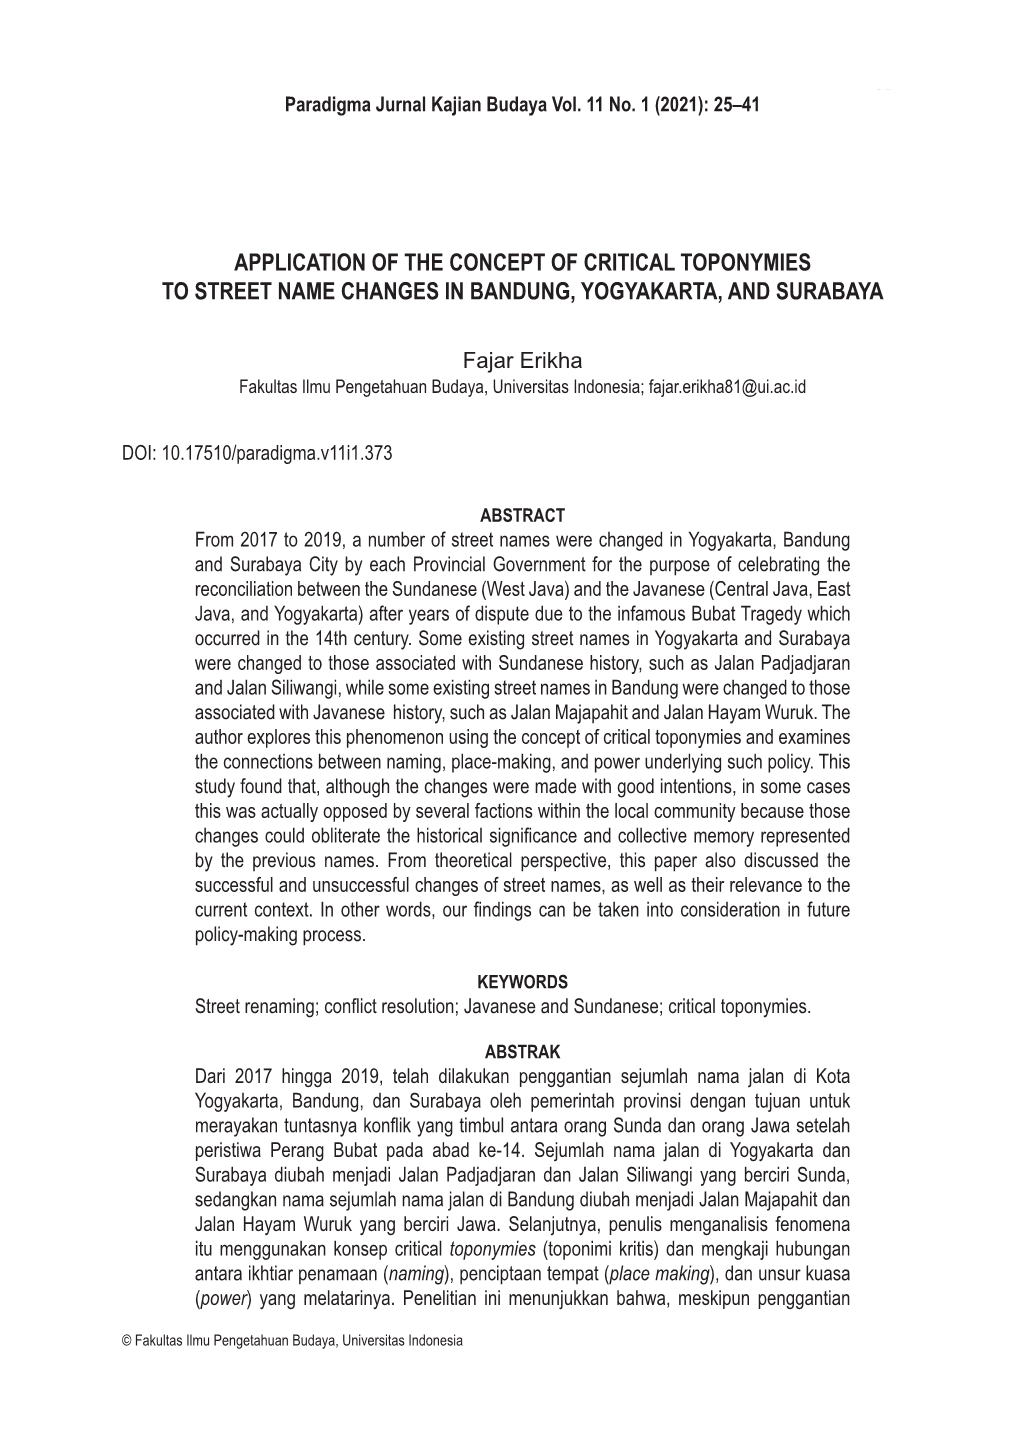 Application of the Concept of Critical Toponymies to Street Name Changes in Bandung, Yogyakarta, and Surabaya